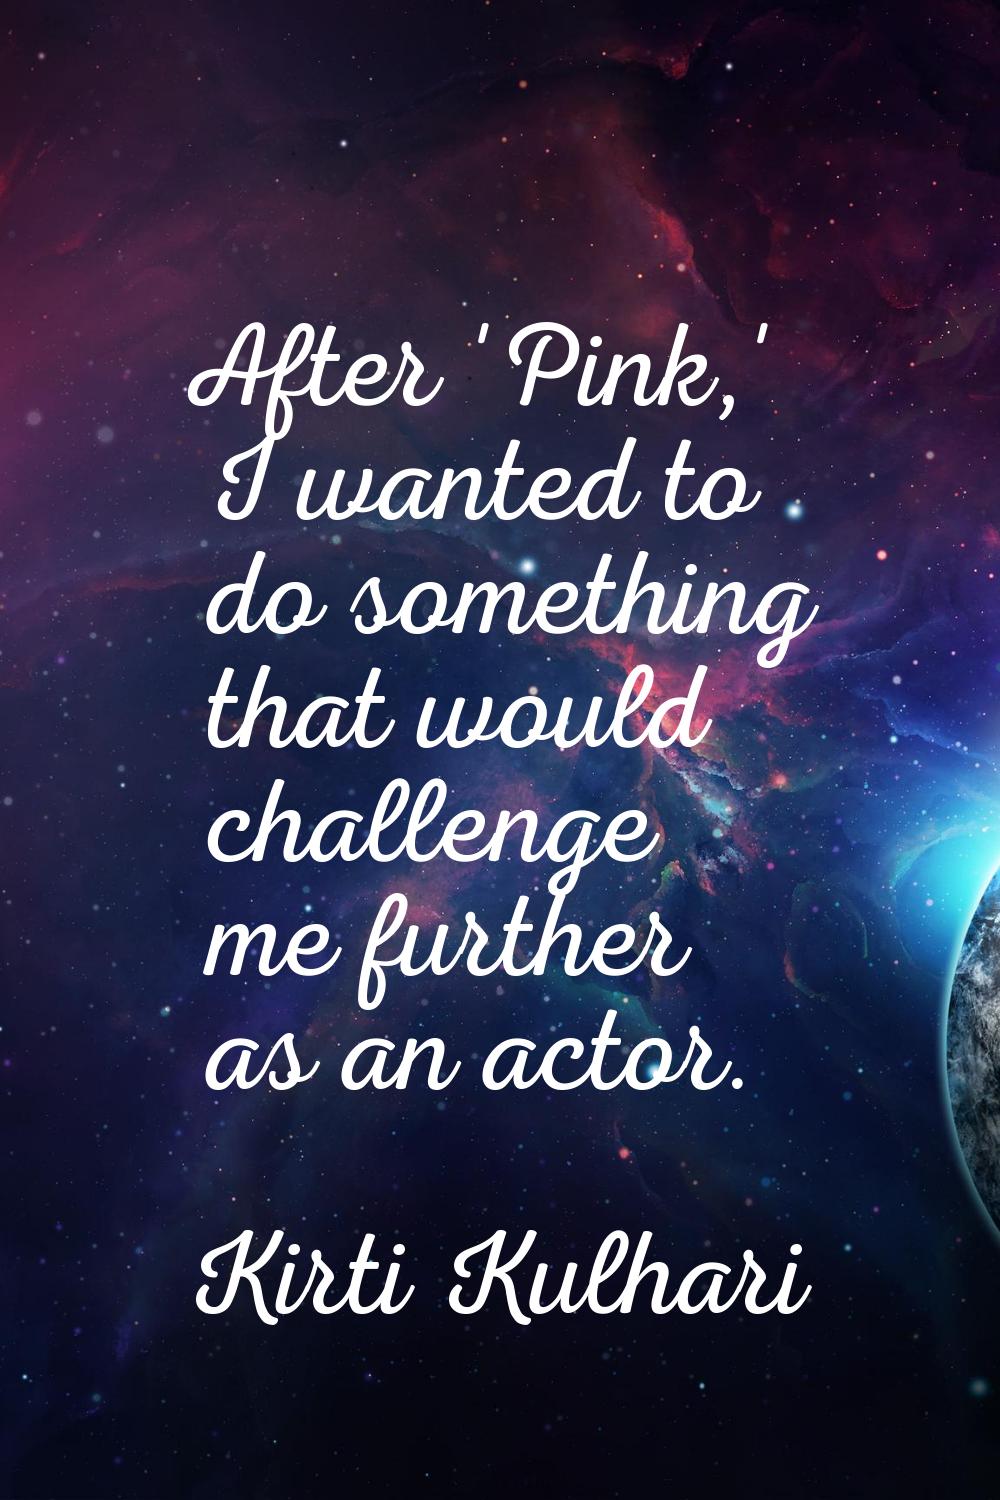 After 'Pink,' I wanted to do something that would challenge me further as an actor.